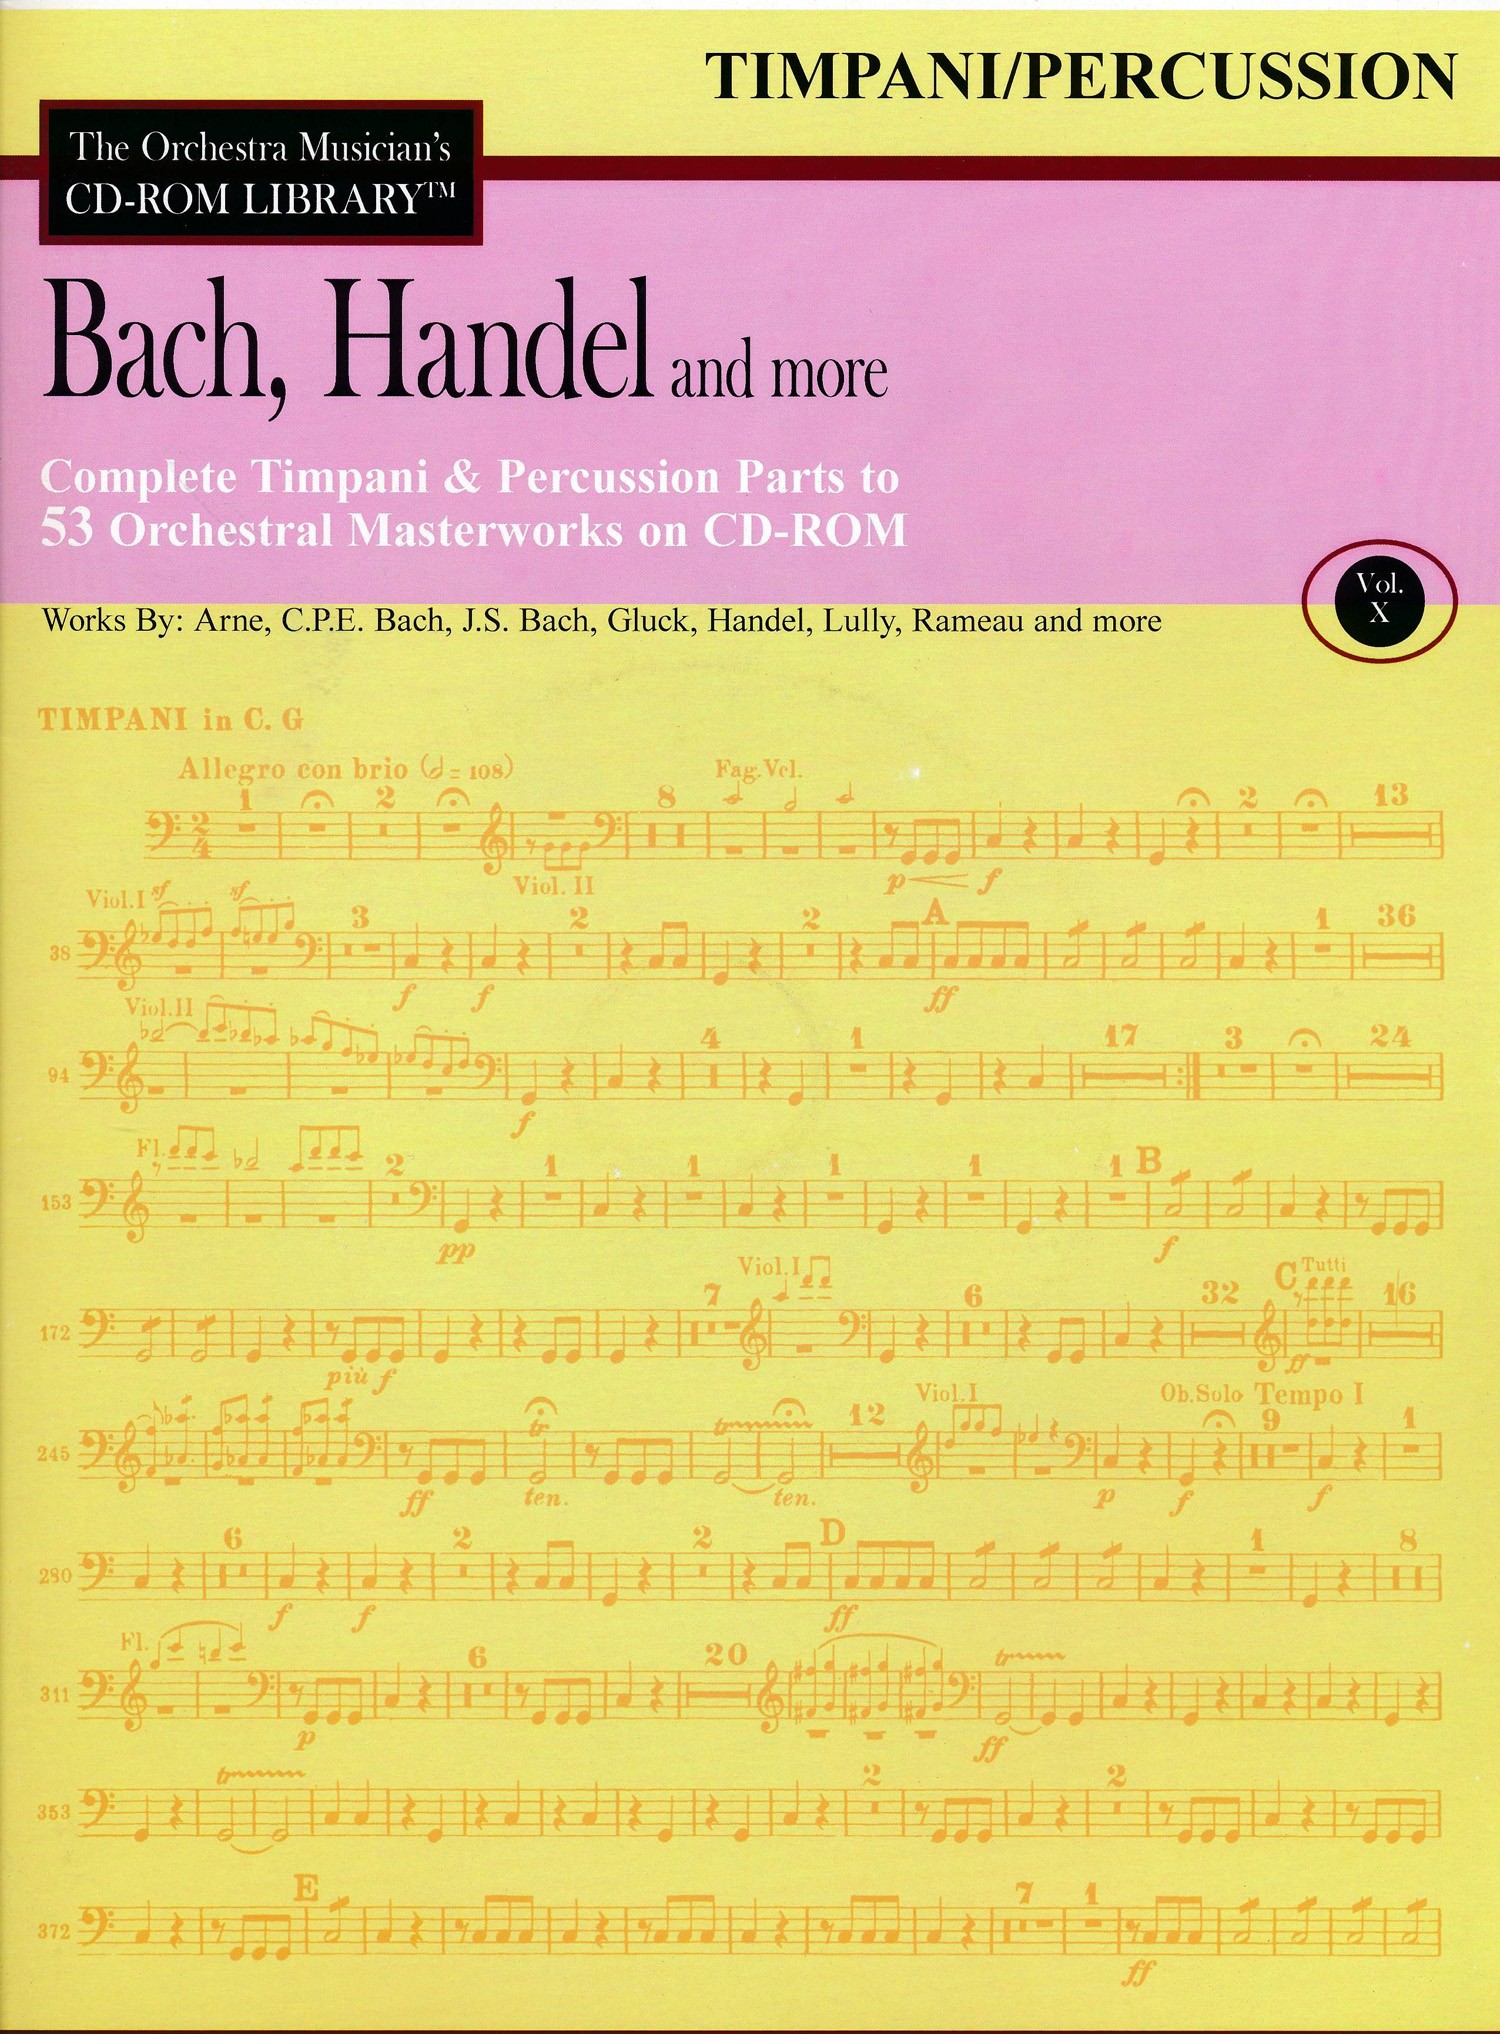 Bach, Handel and More - Volume 10 (CD Library)